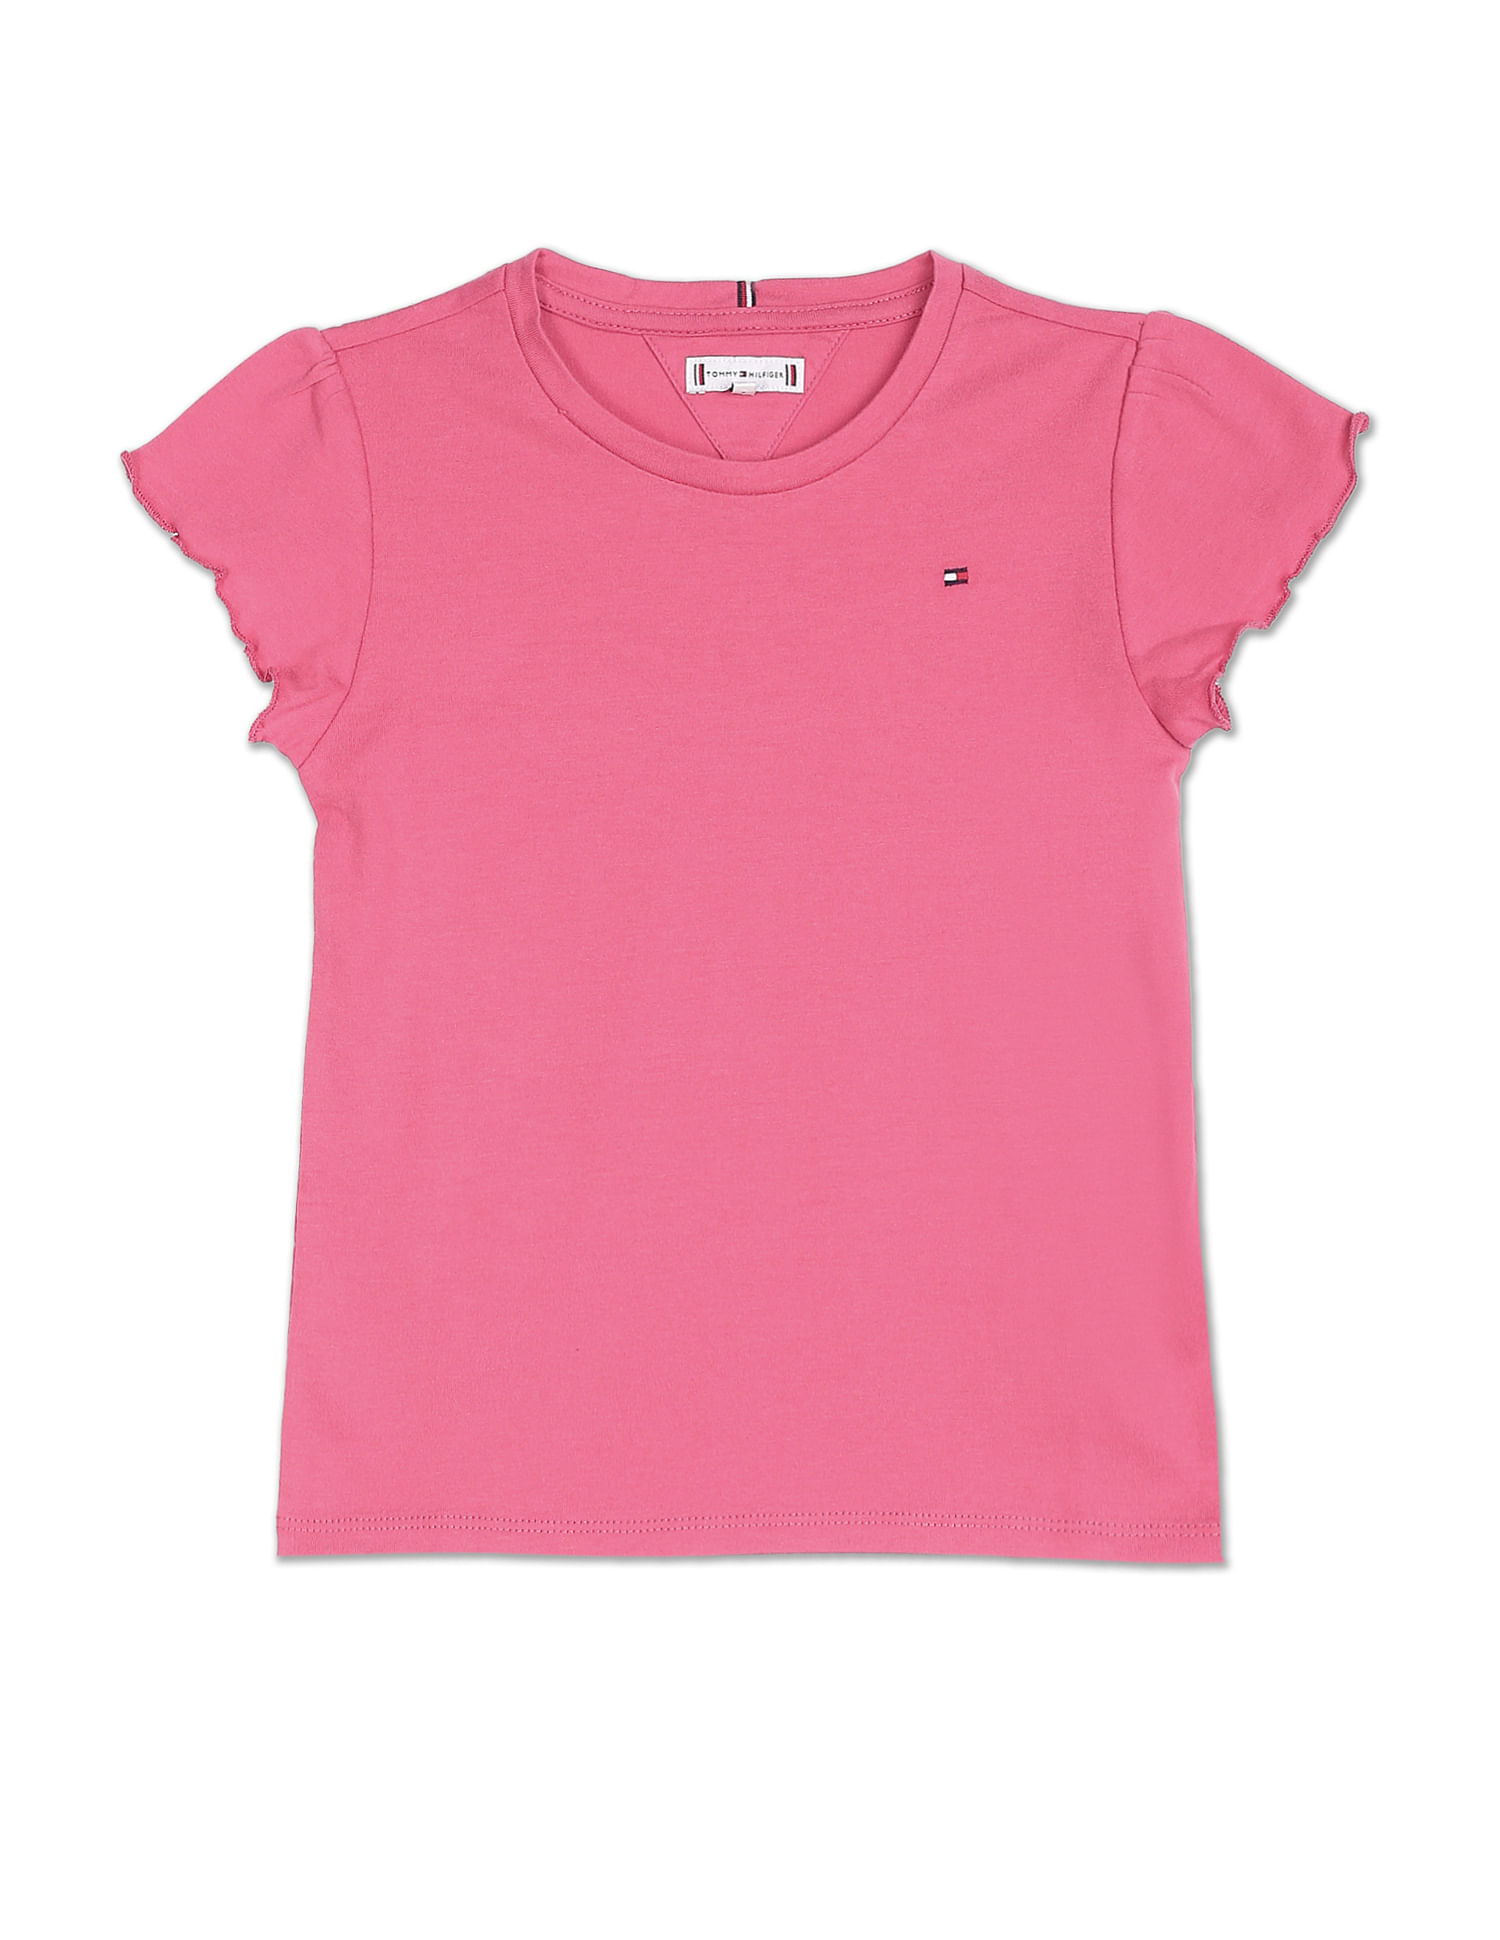 Hilfiger Sleeve T-Shirt Ruffle Cotton Essential Tommy Buy Kids